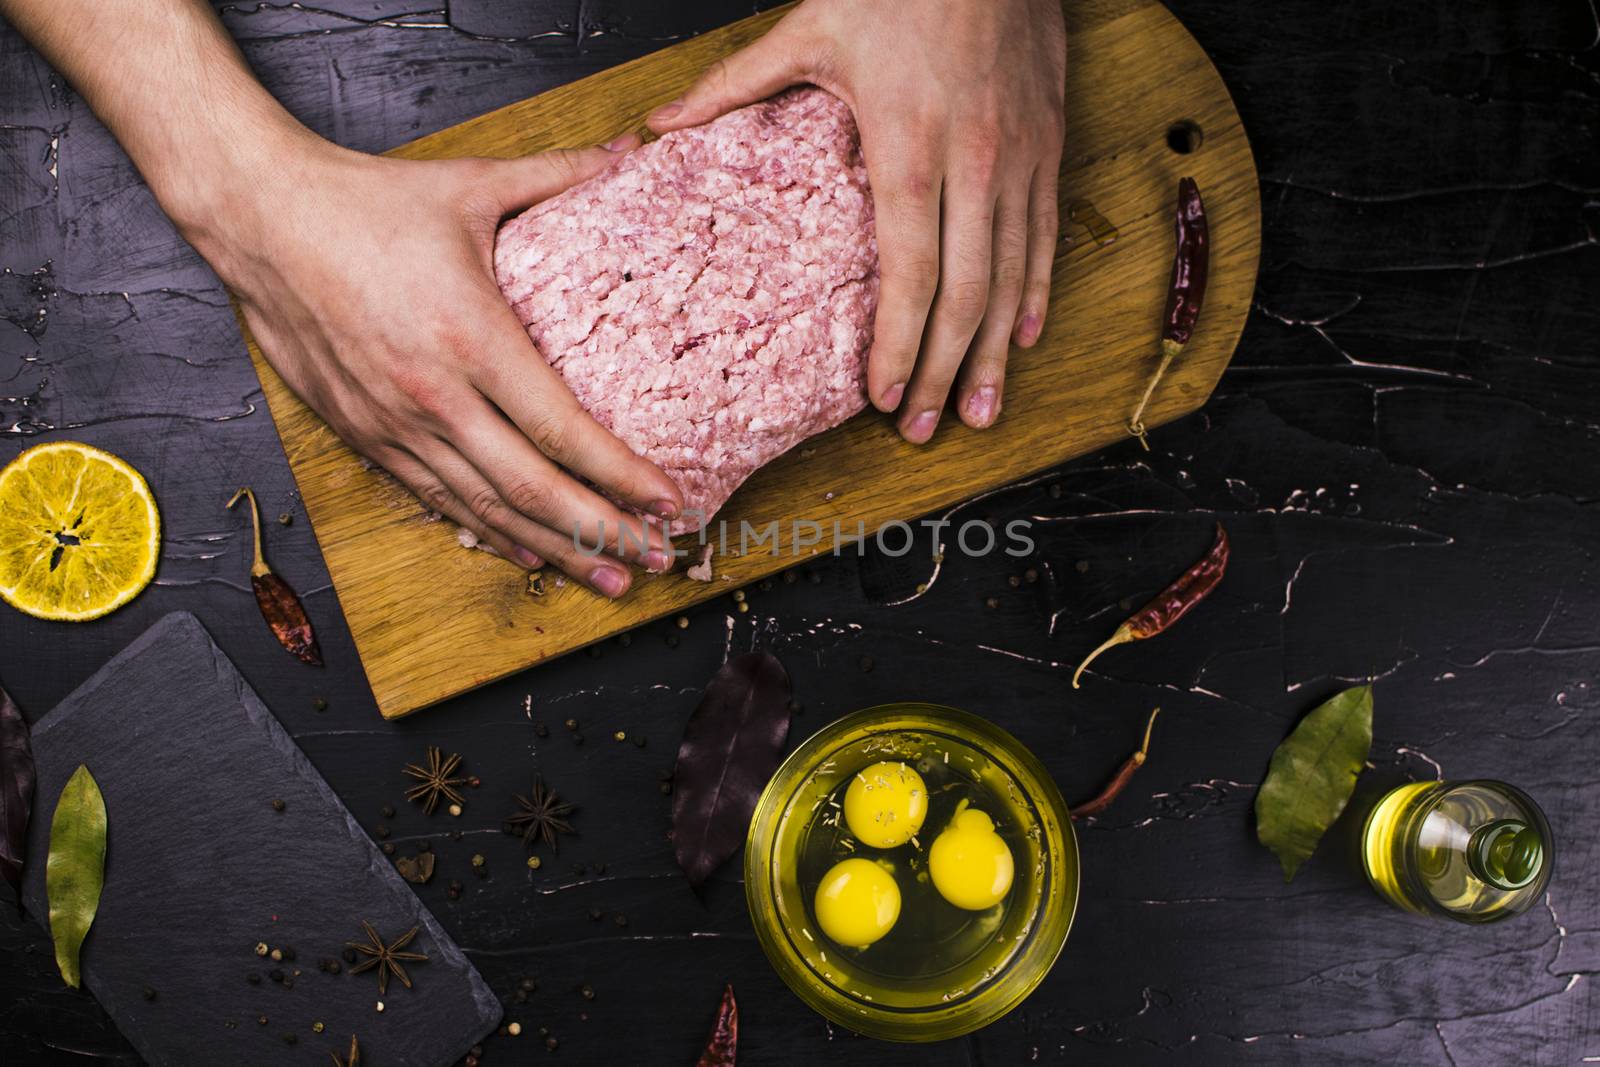 A man prepares the meat